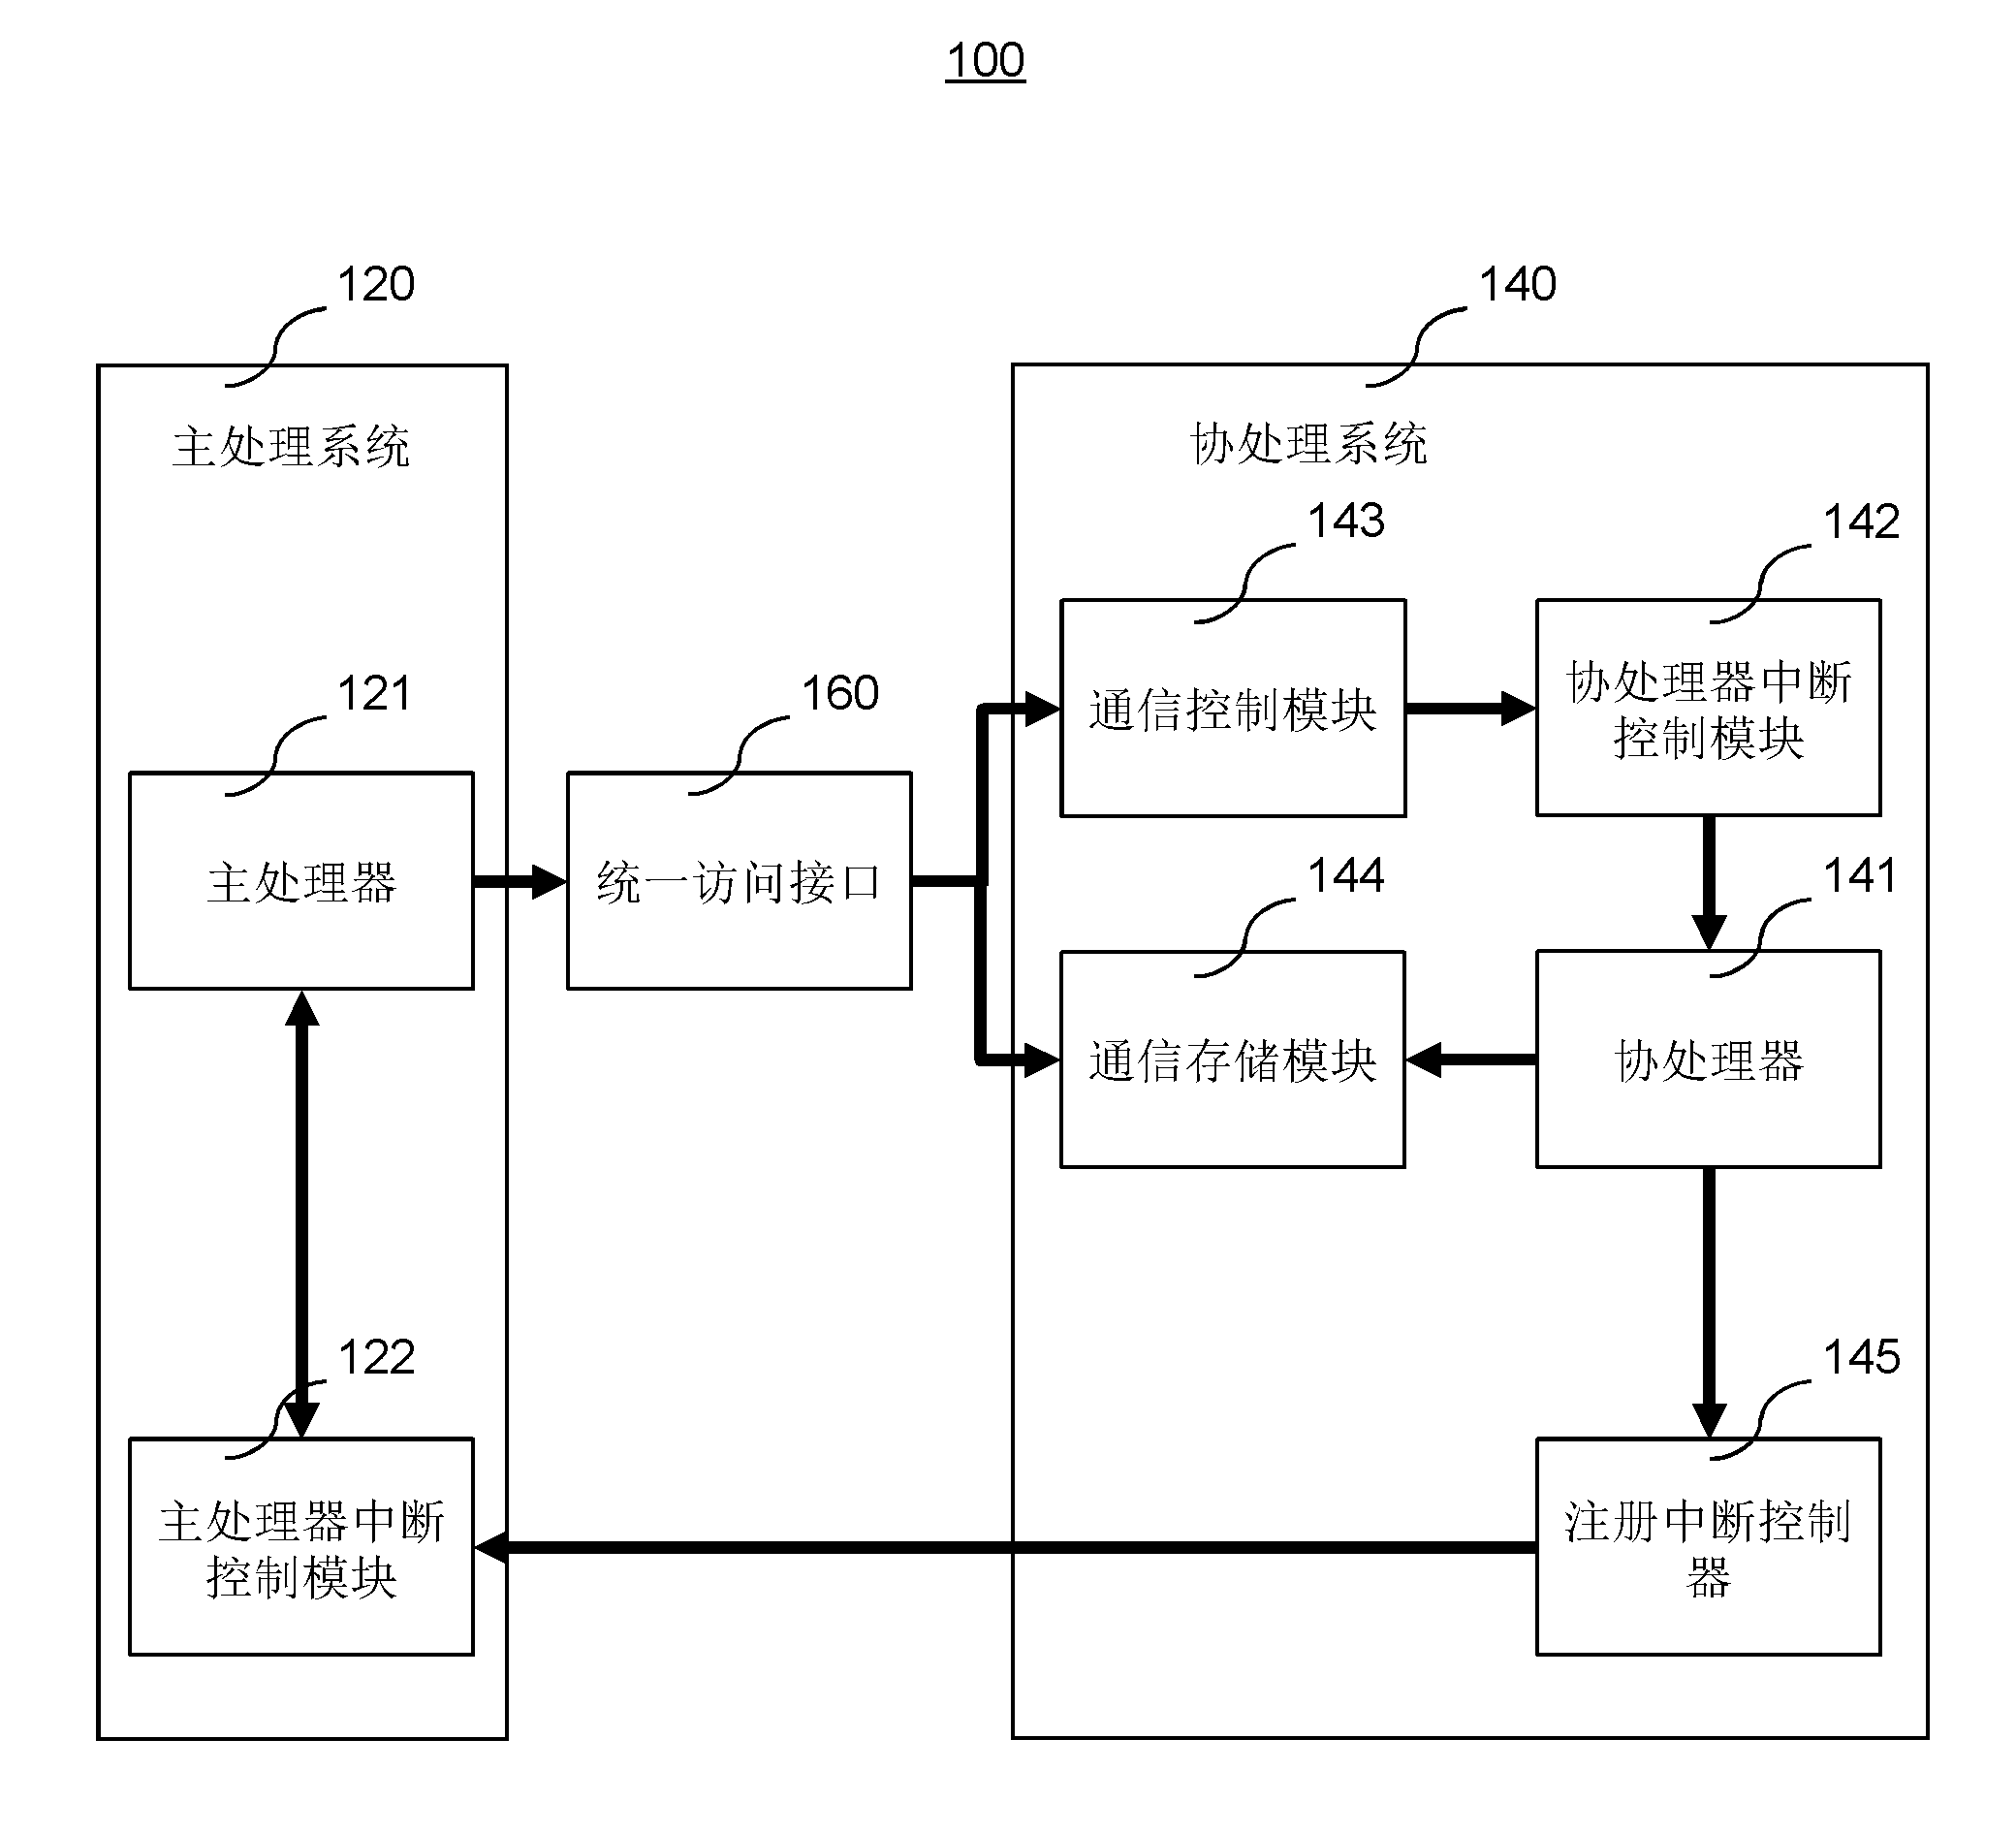 Main processor and coprocessor communication system and communication method